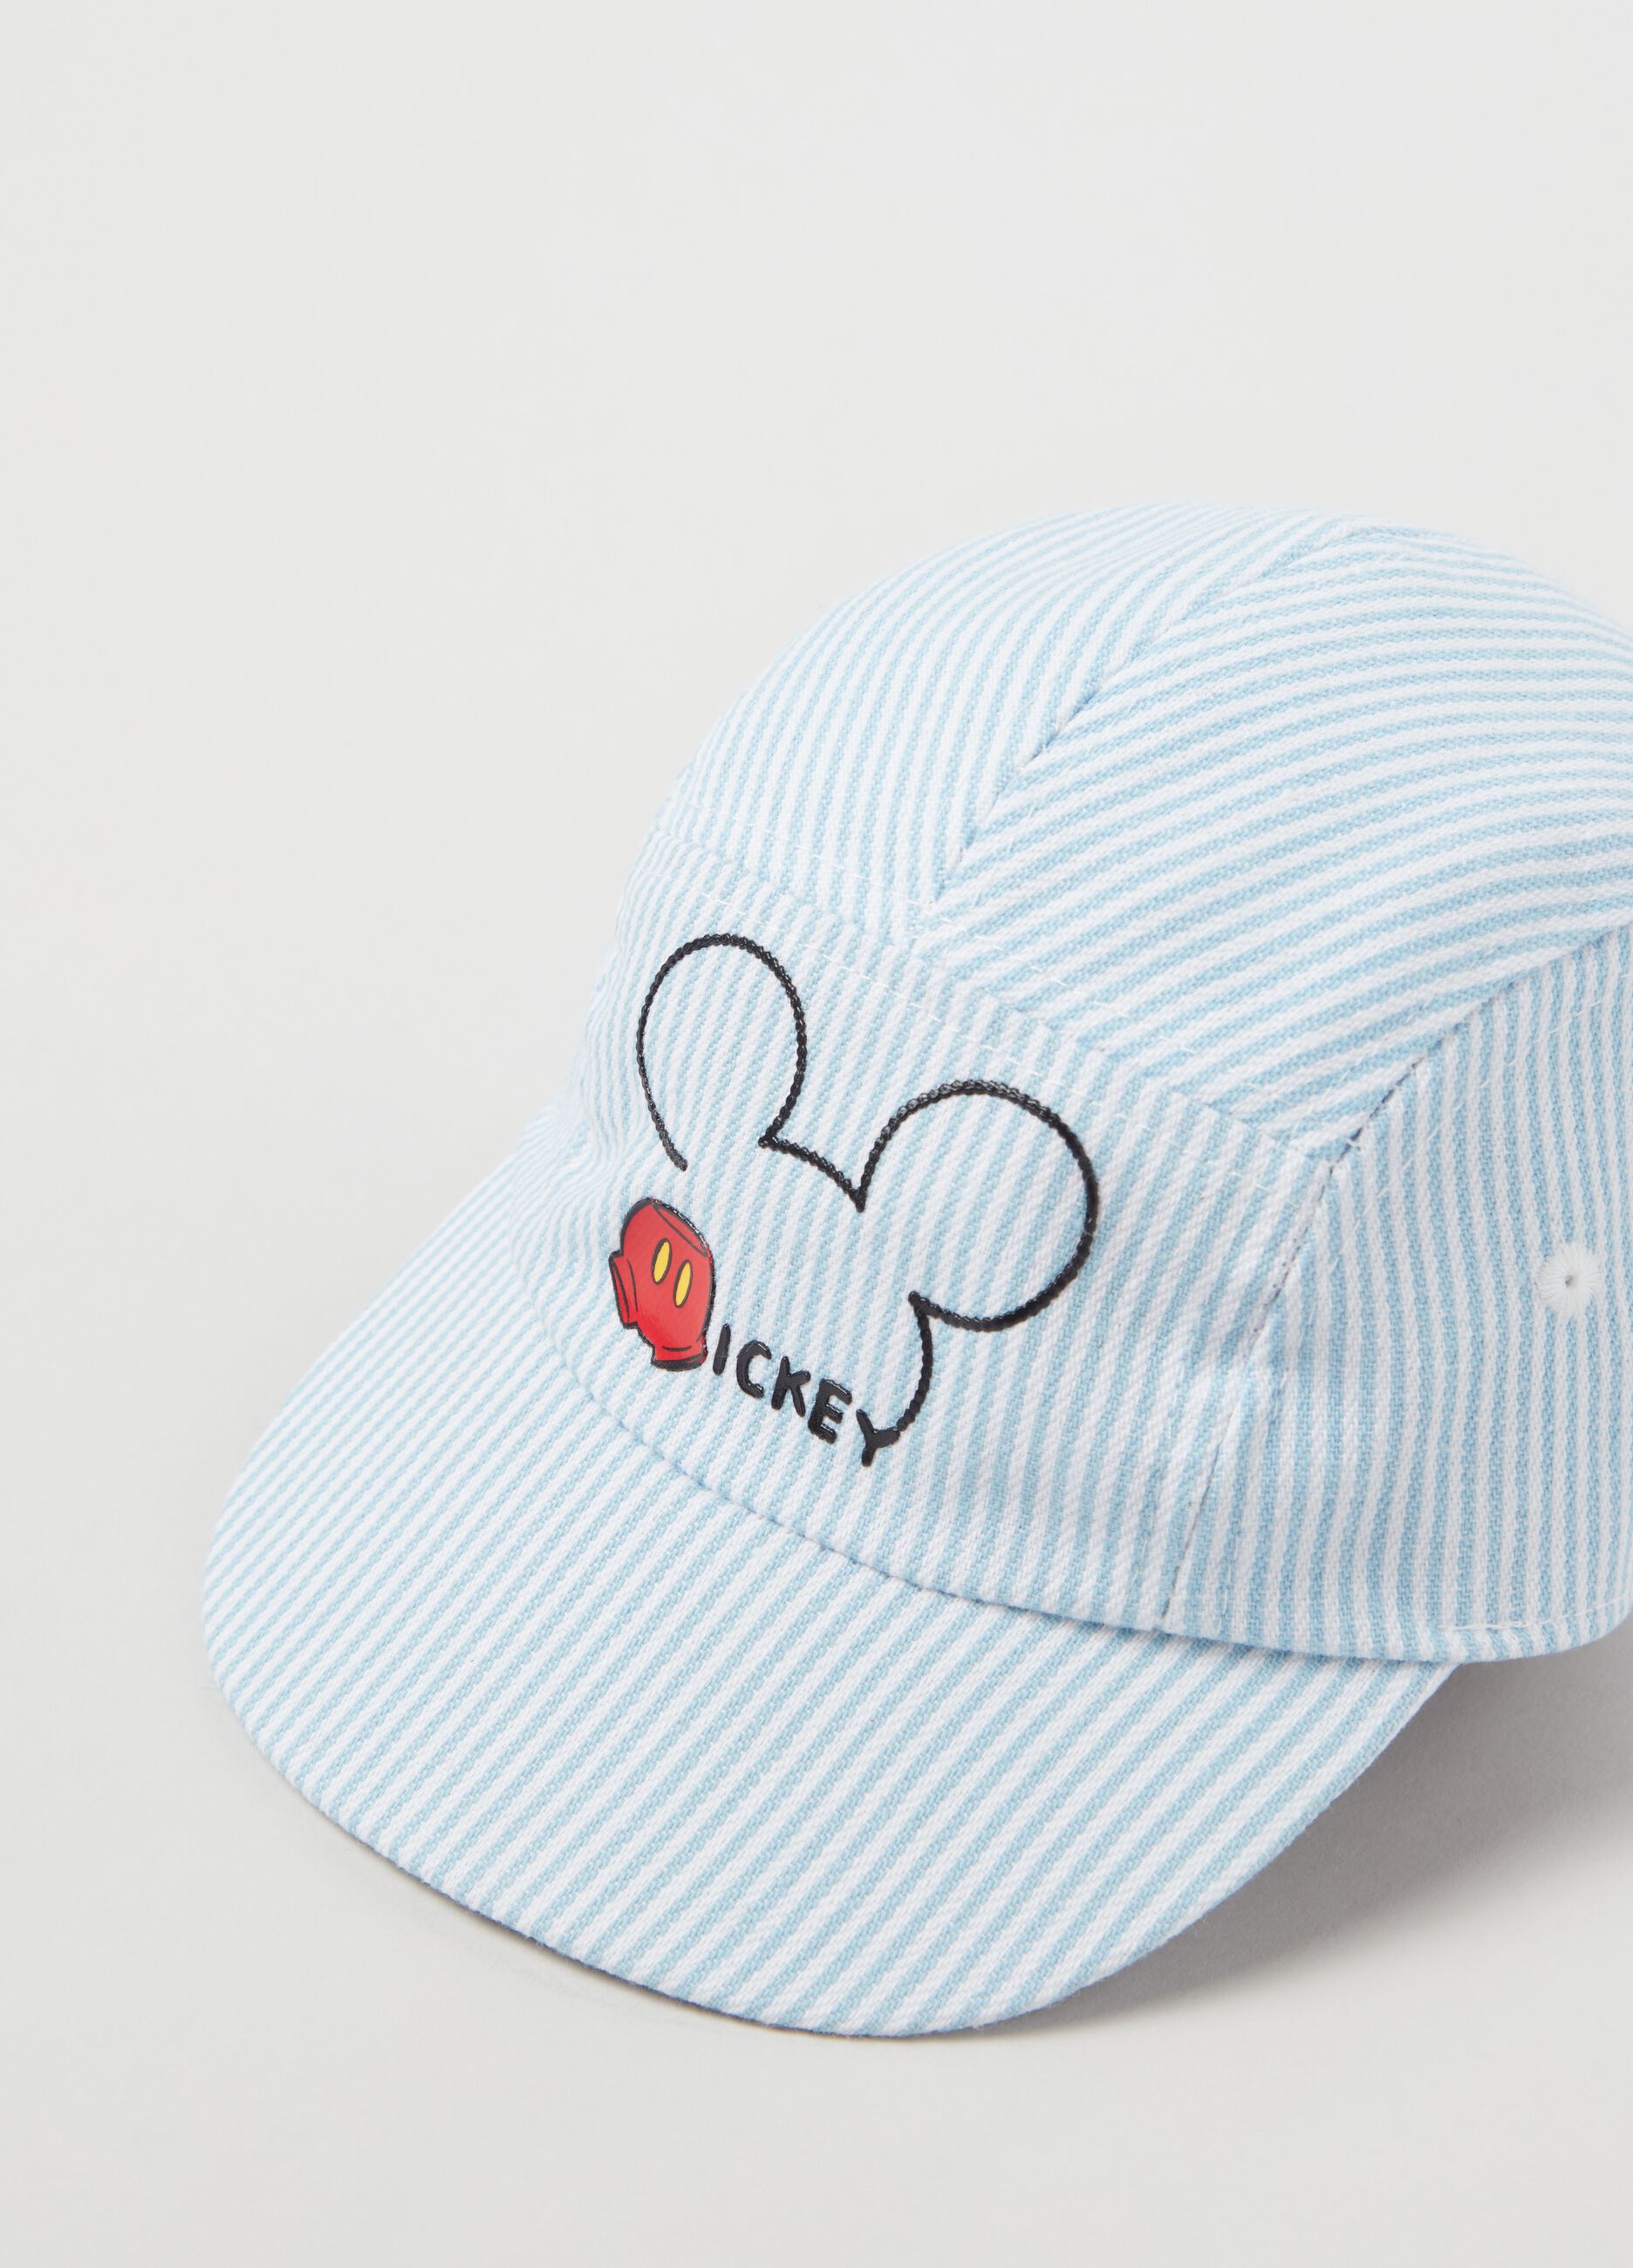 Baseball cap with Mickey Mouse print